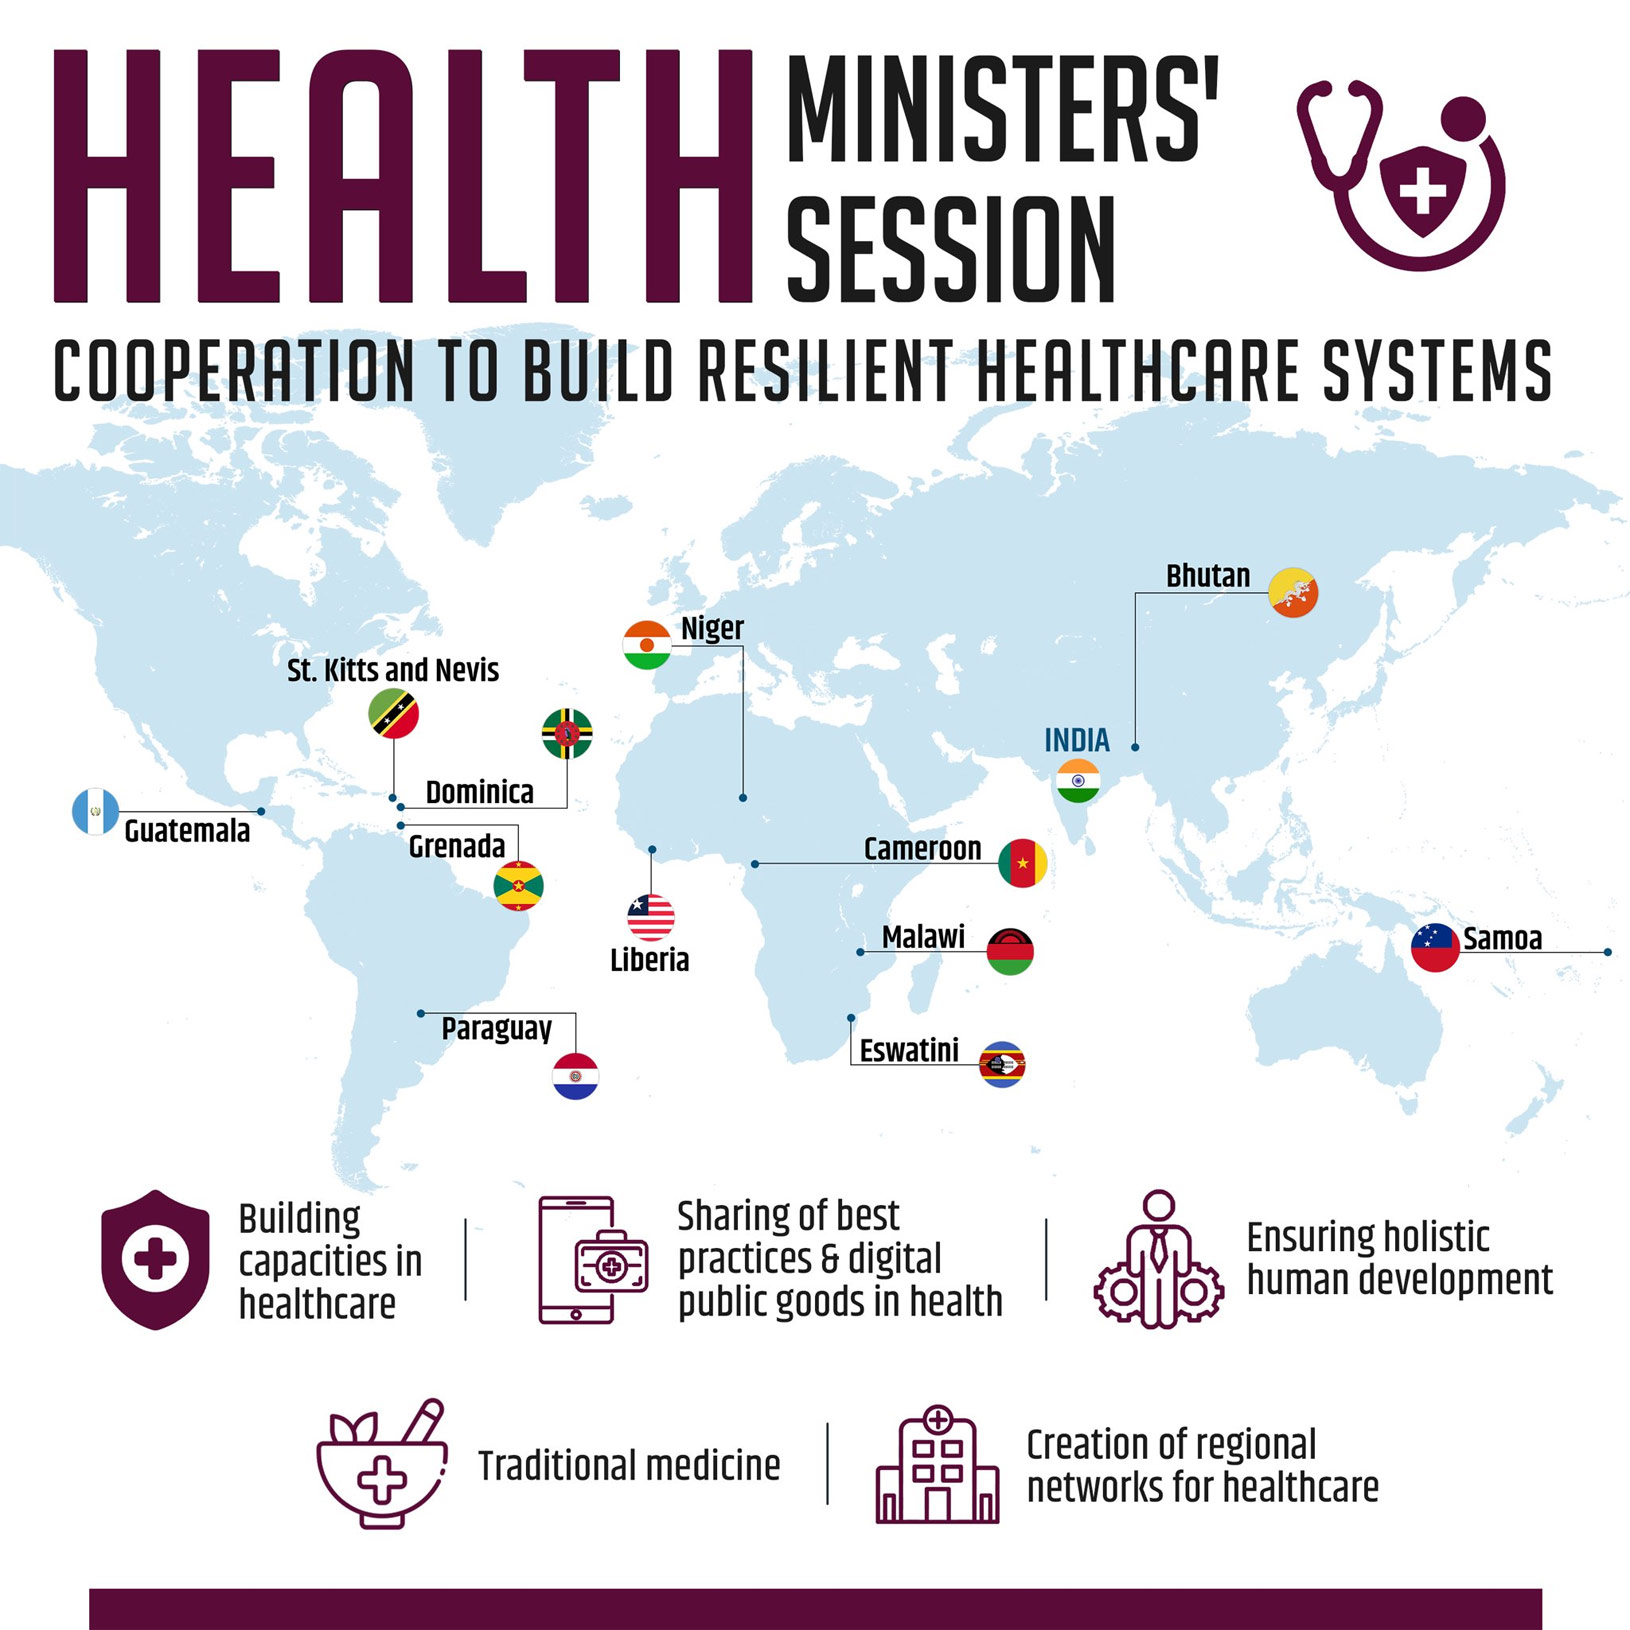 Health Ministers’ Session